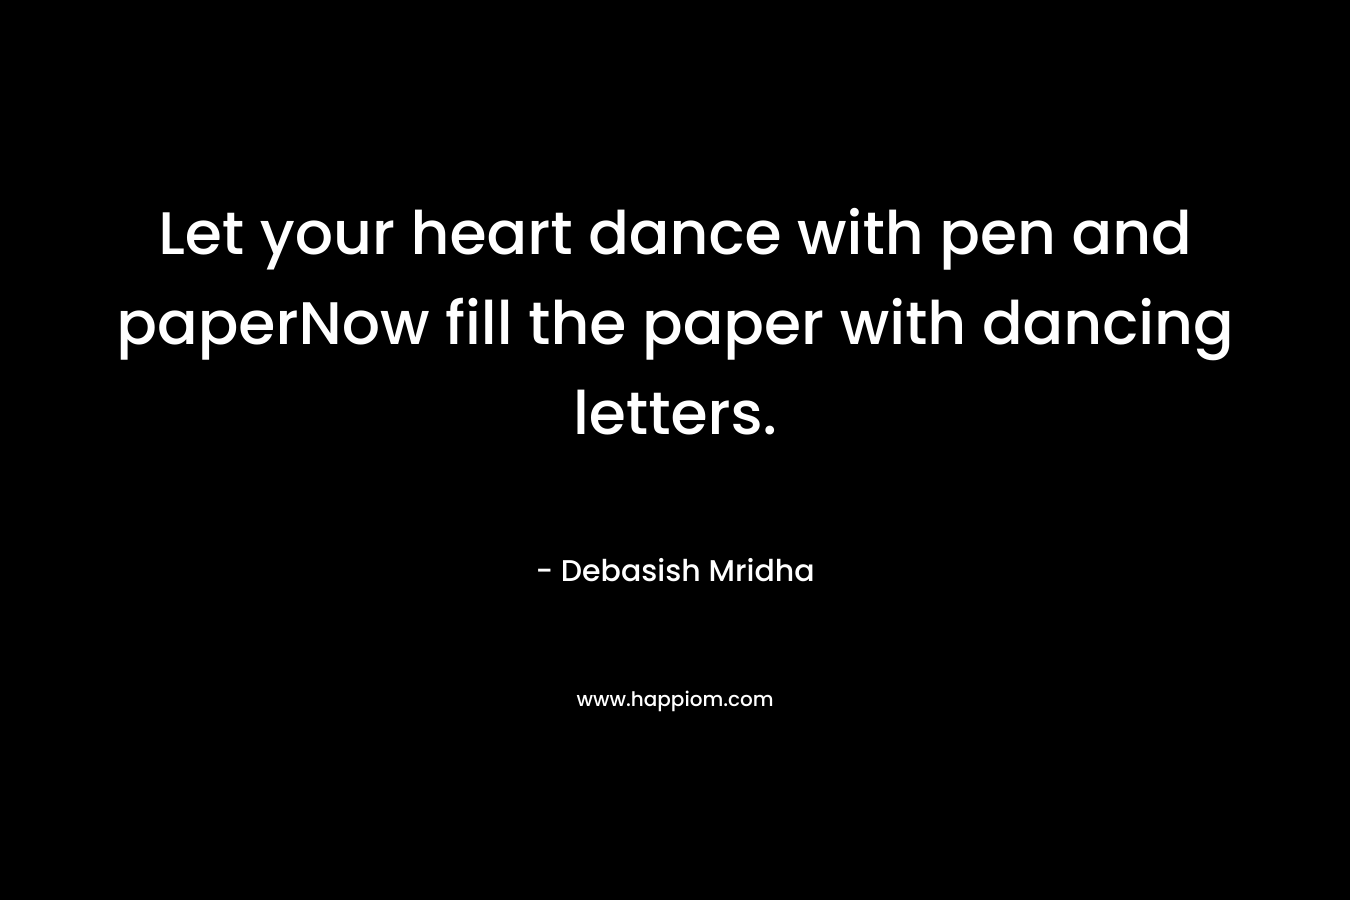 Let your heart dance with pen and paperNow fill the paper with dancing letters. – Debasish Mridha